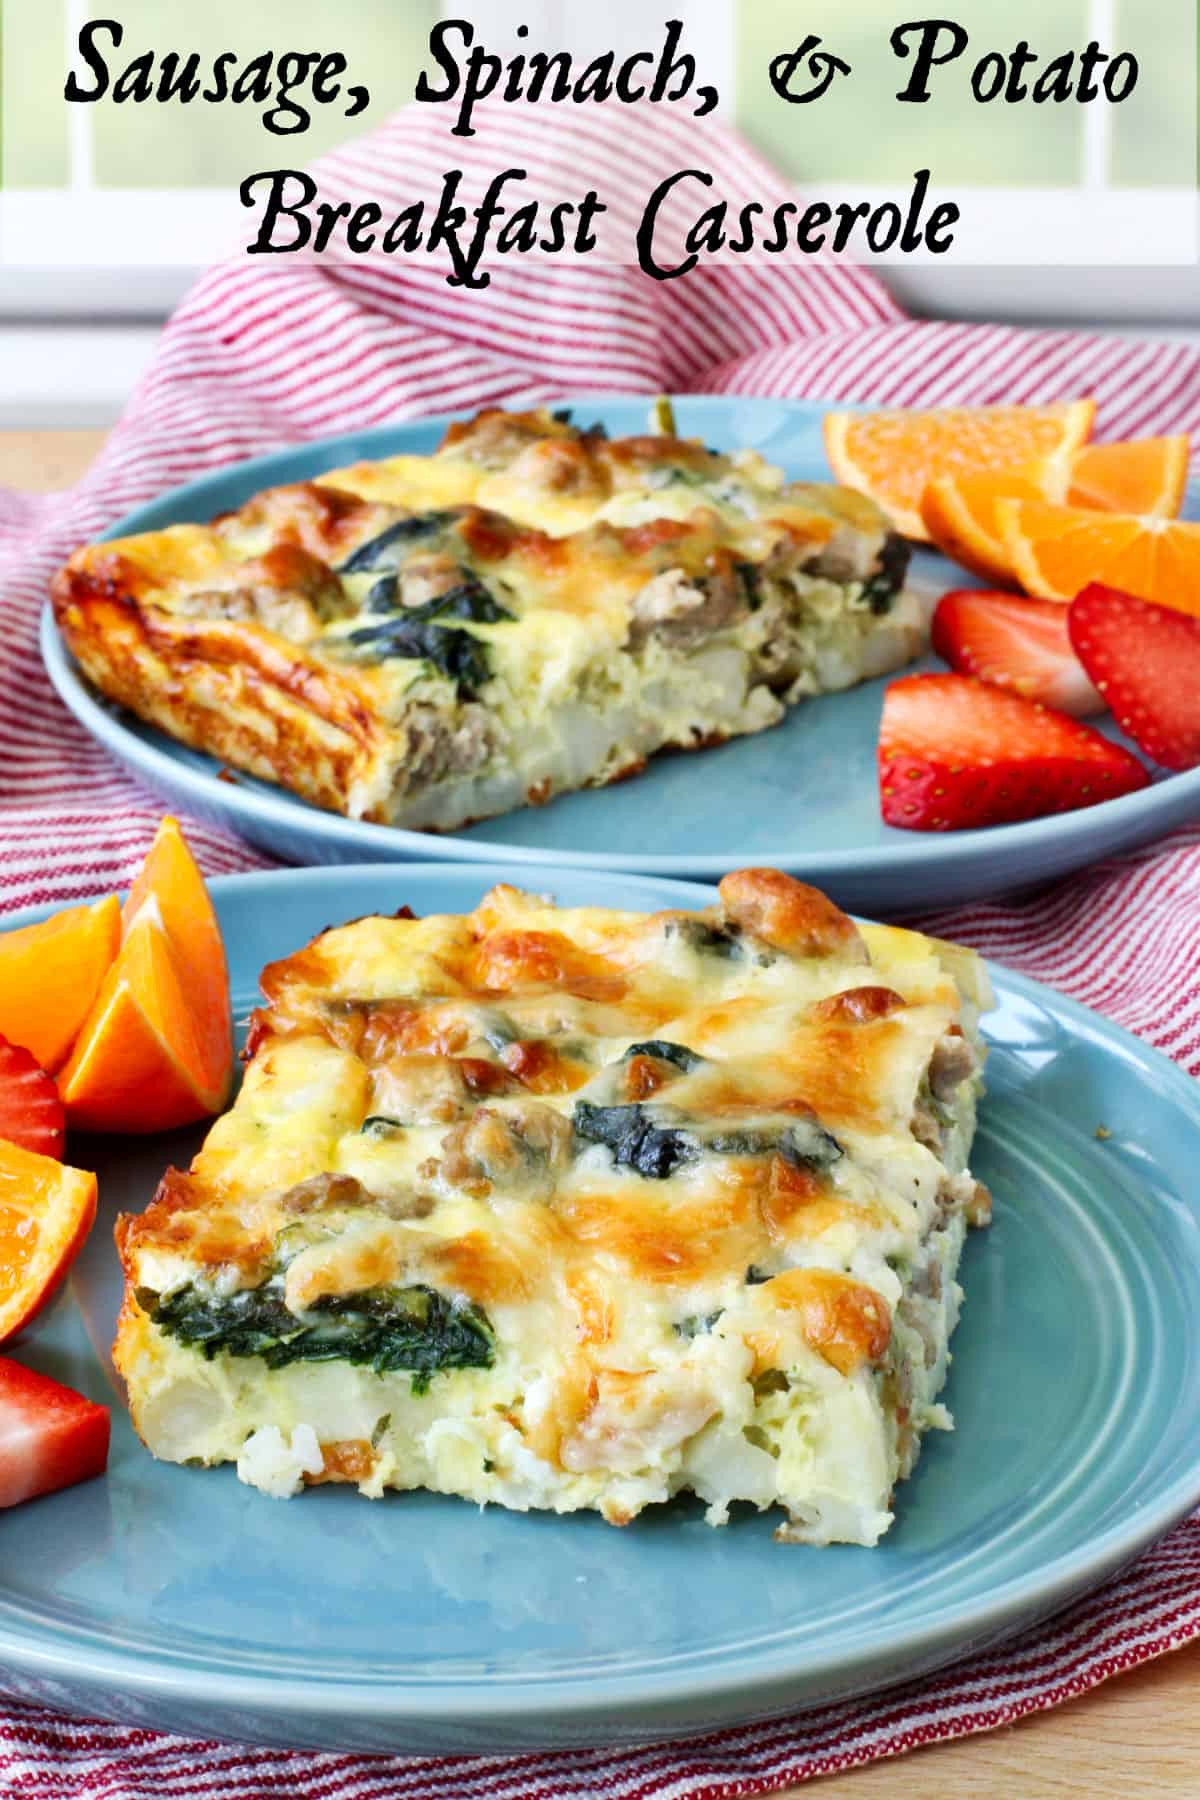 Sausage and Spinach Breakfast Casserole on a blue plate.